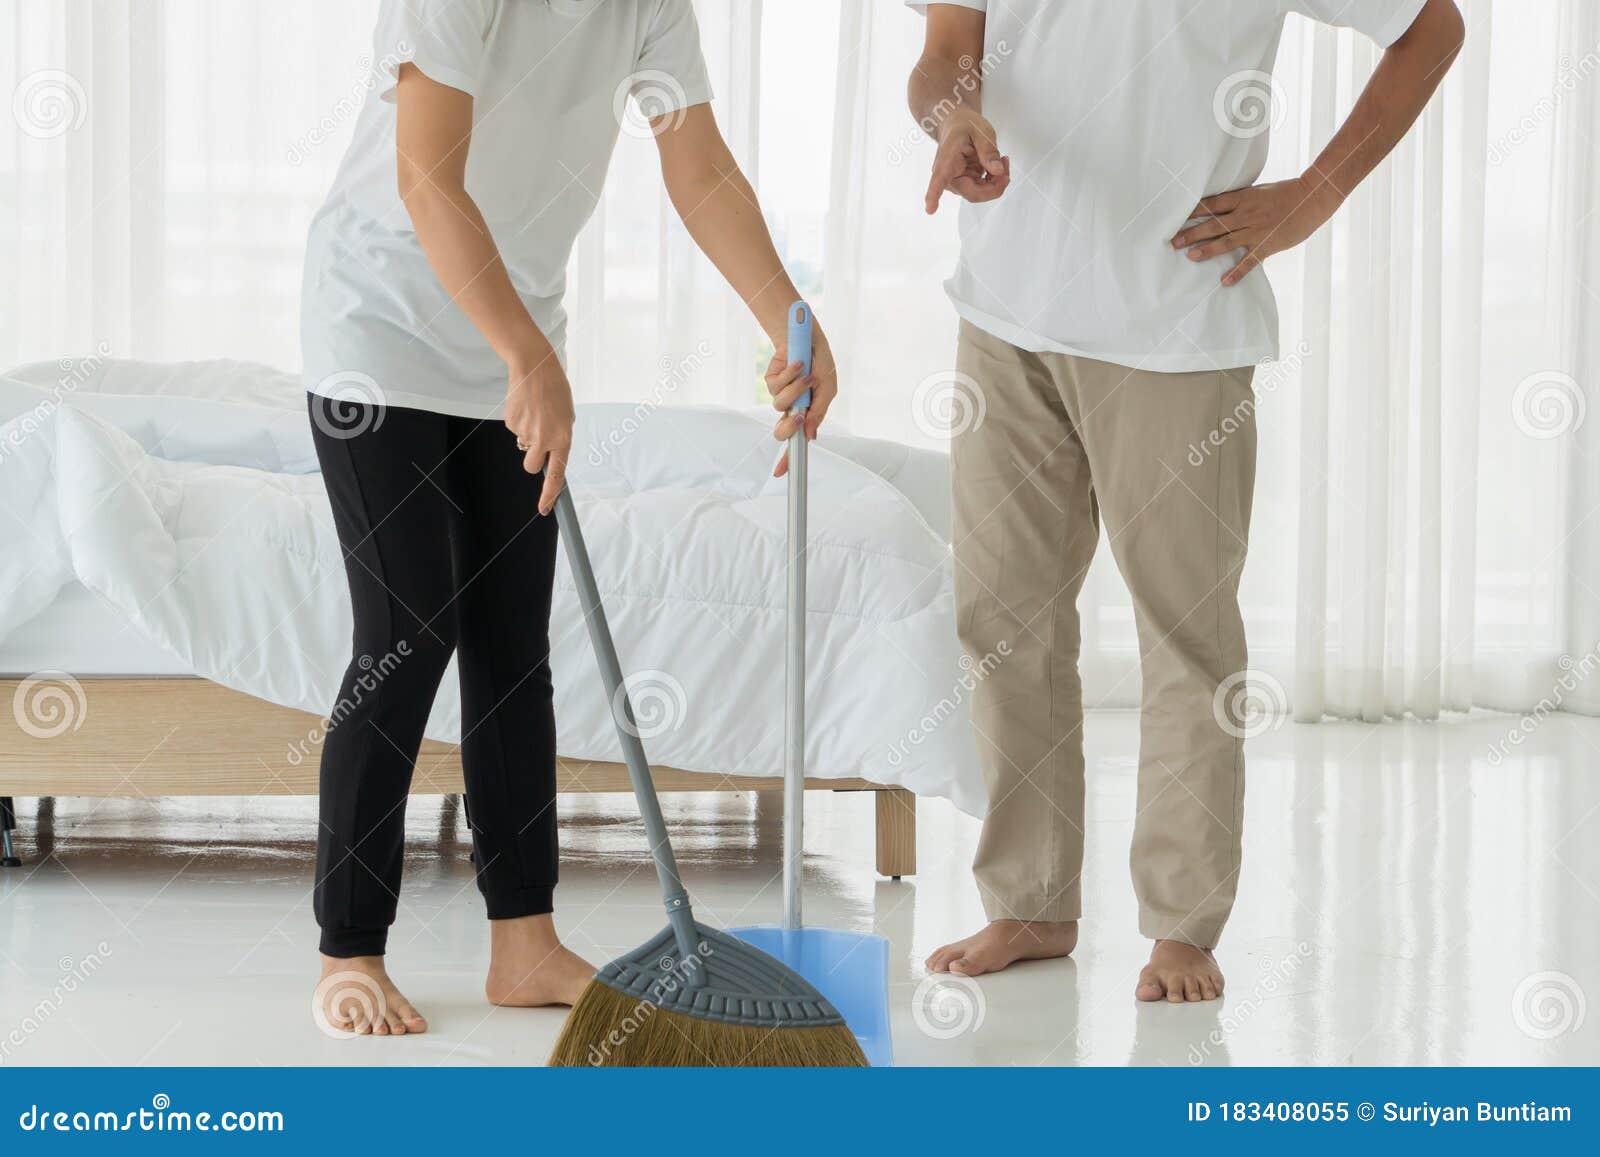 Husband And Wife Are Cleaning The House Stock Image Image Of Hou